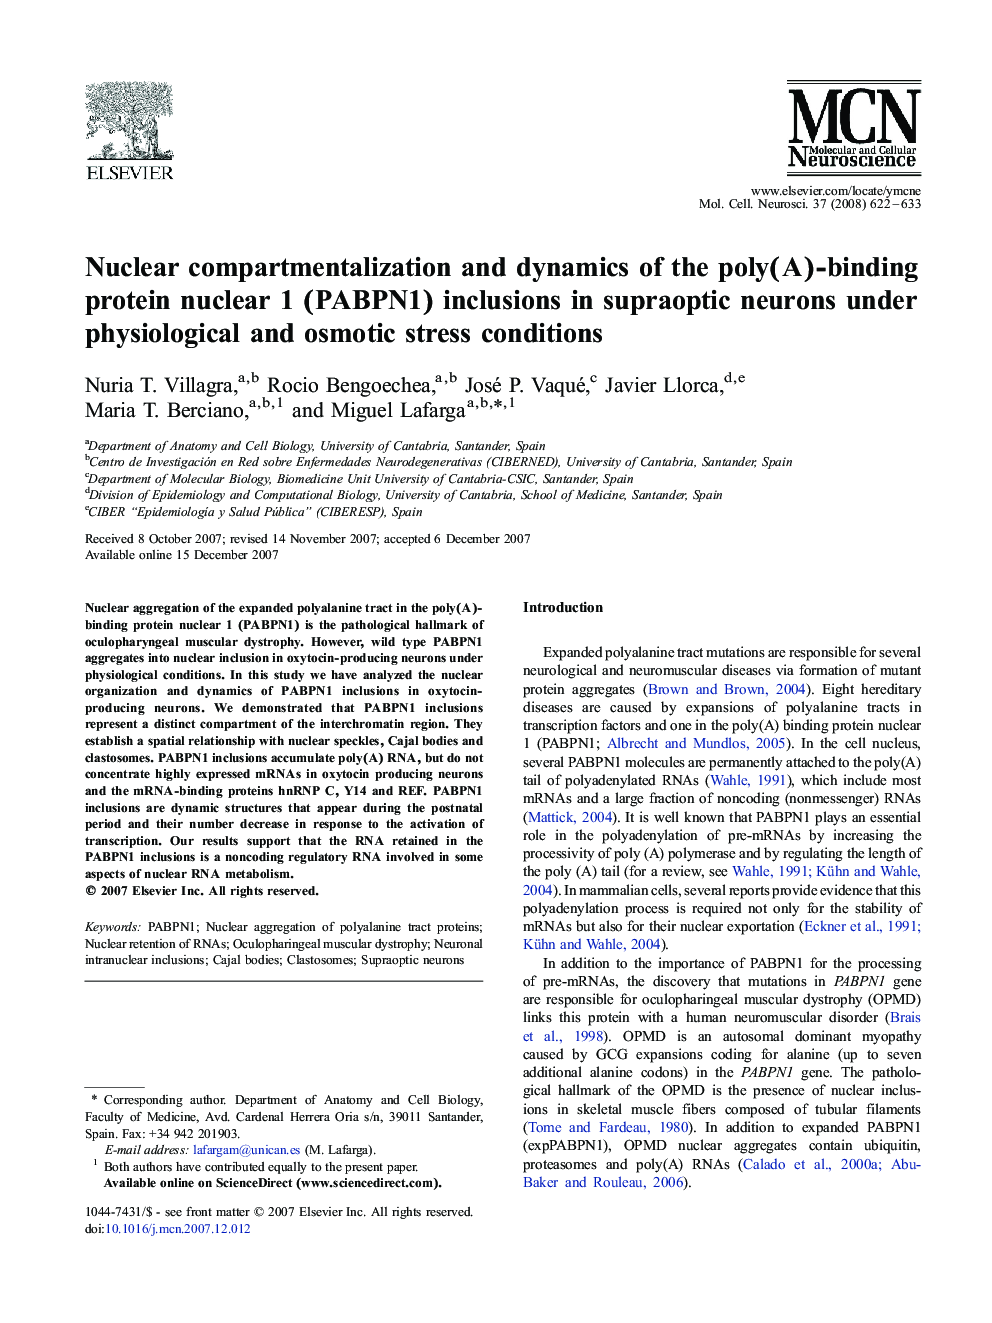 Nuclear compartmentalization and dynamics of the poly(A)-binding protein nuclear 1 (PABPN1) inclusions in supraoptic neurons under physiological and osmotic stress conditions